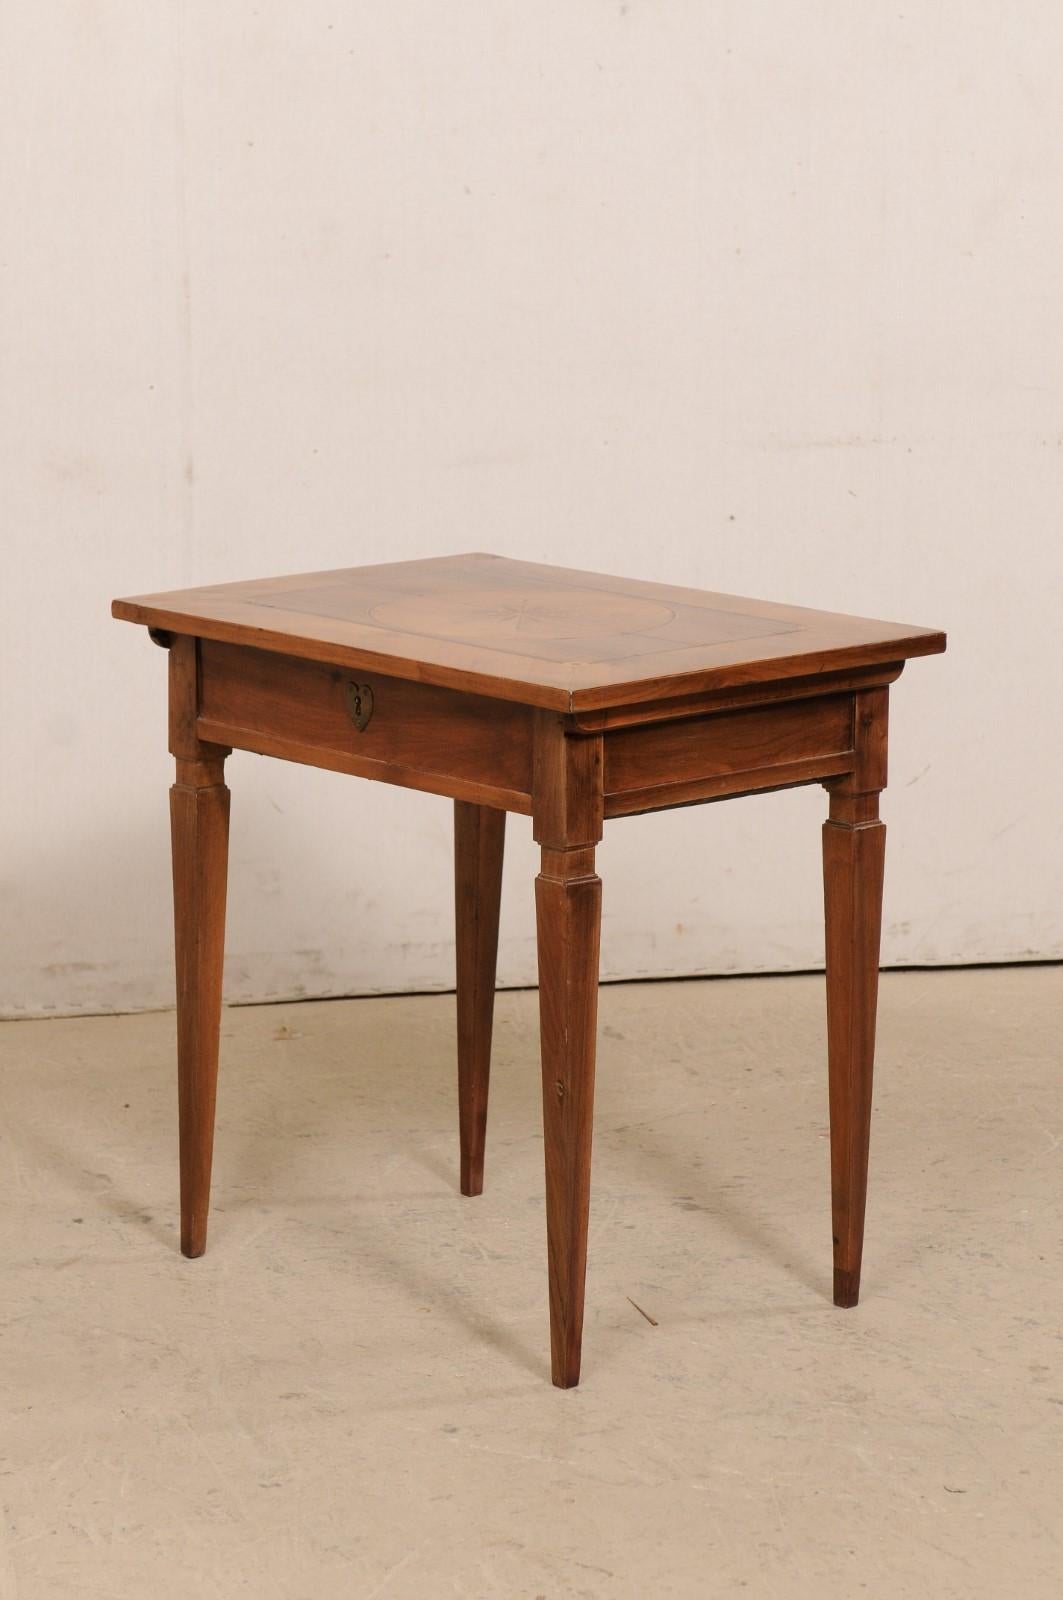 19th C. Italian Writing Desk w/Decorative Inlay & Sliding Top for Hidden Storage For Sale 4